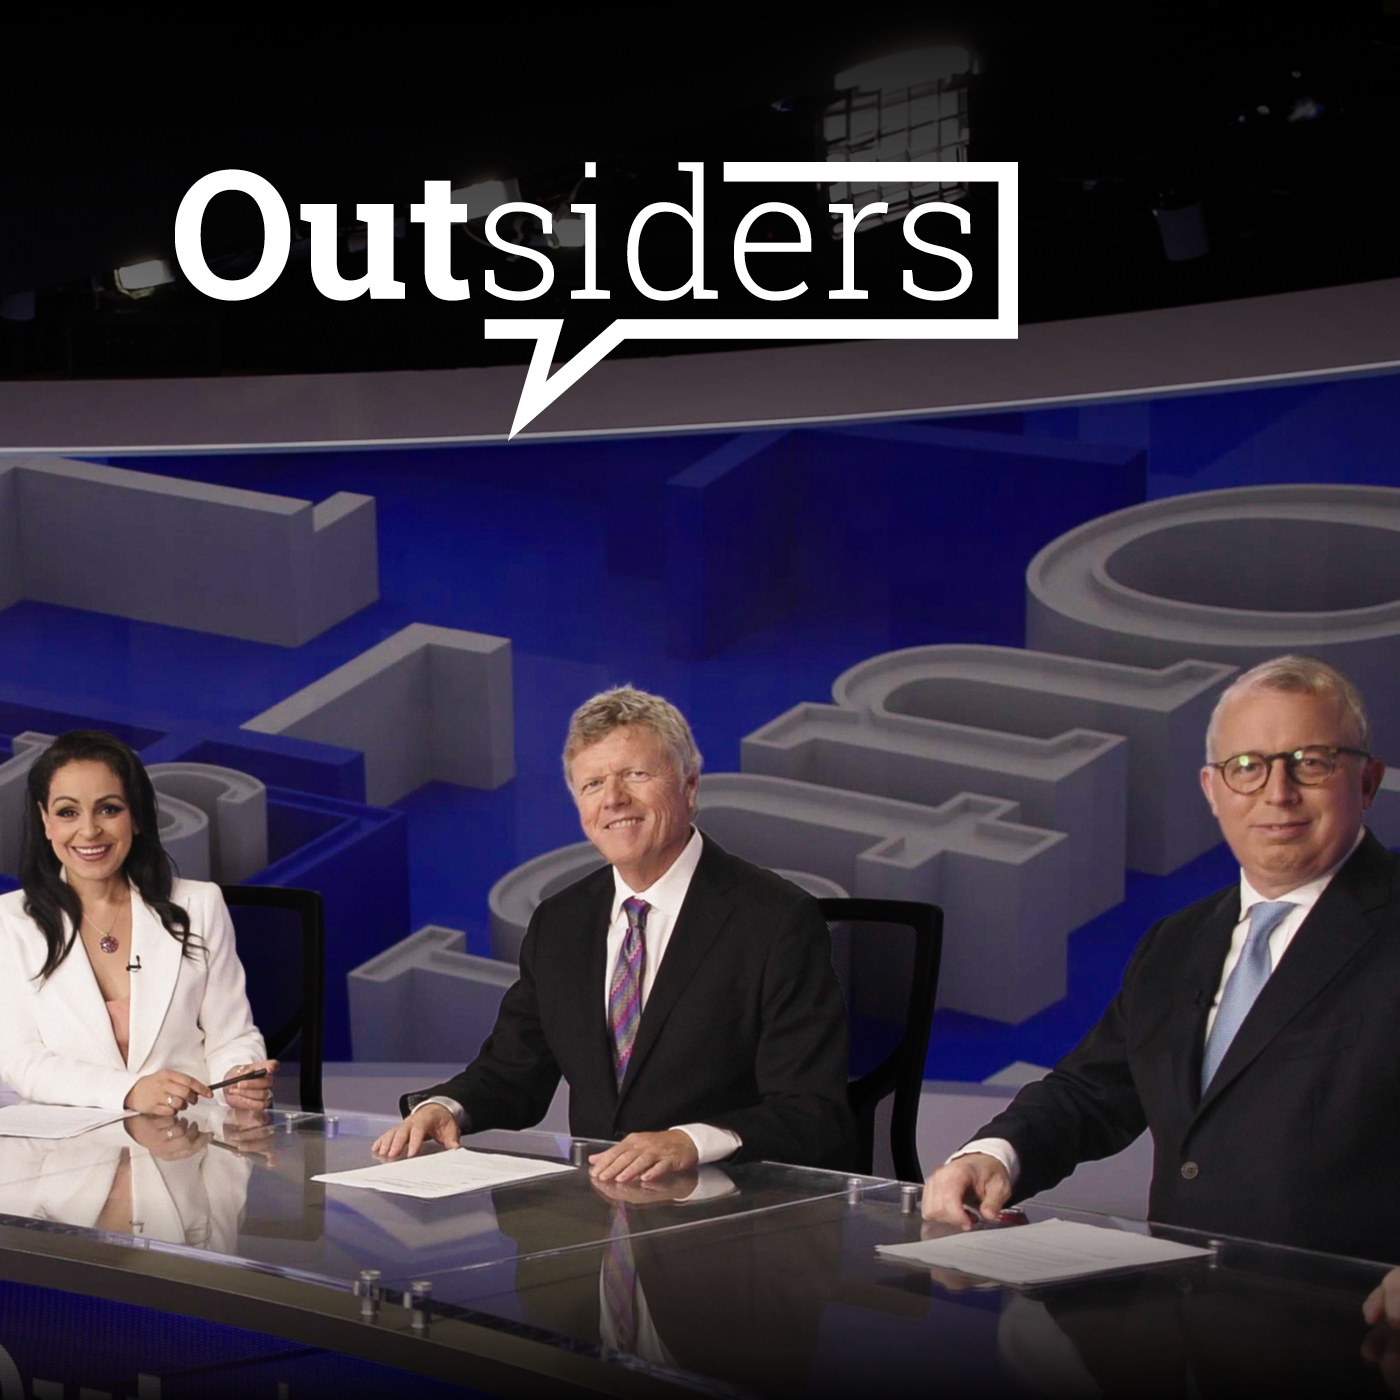 Outsiders, Sunday 20th June